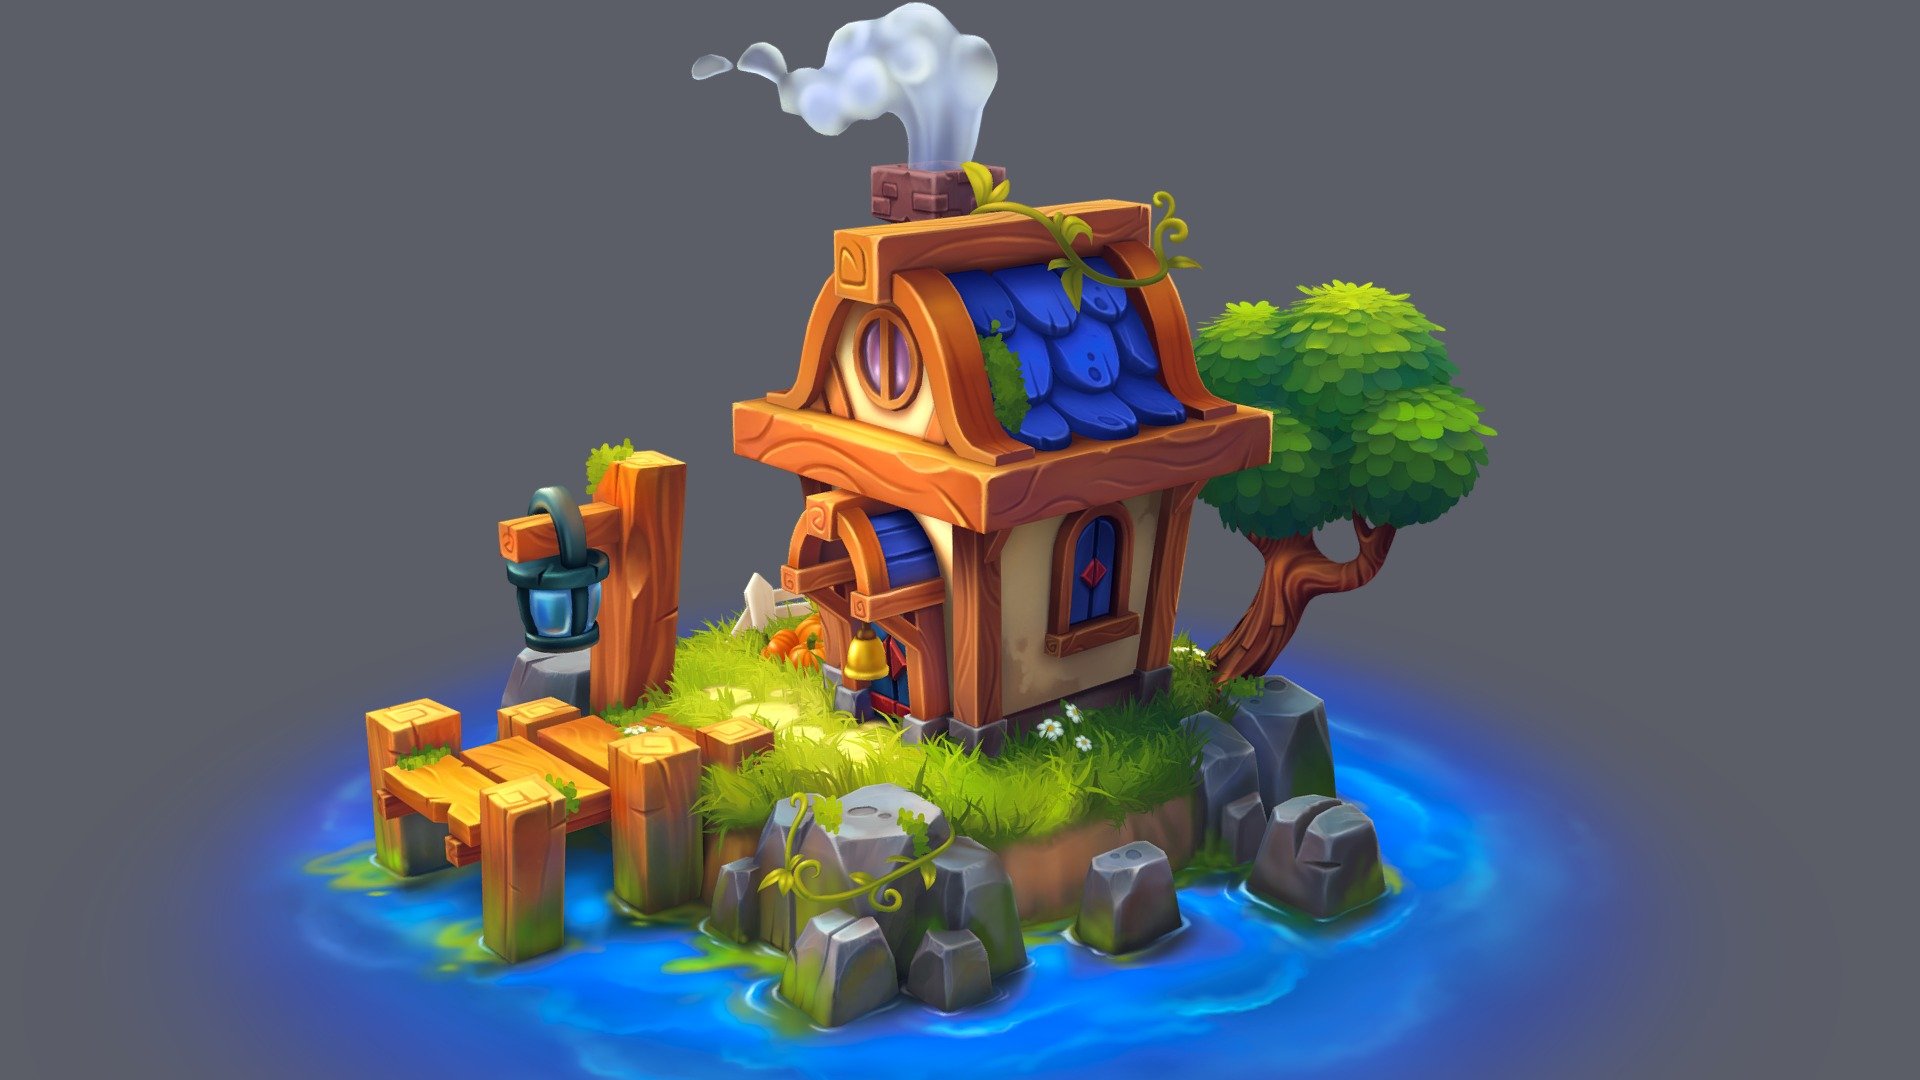 Another model for texturing practice :)
Based on fantastic art by Anna Lepeshkina
https://www.youtube.com/watch?v=RPyrUI6s10w - Handpainted House - 3D model by Alina Zhdanova (@ilandion.rise) 3d model